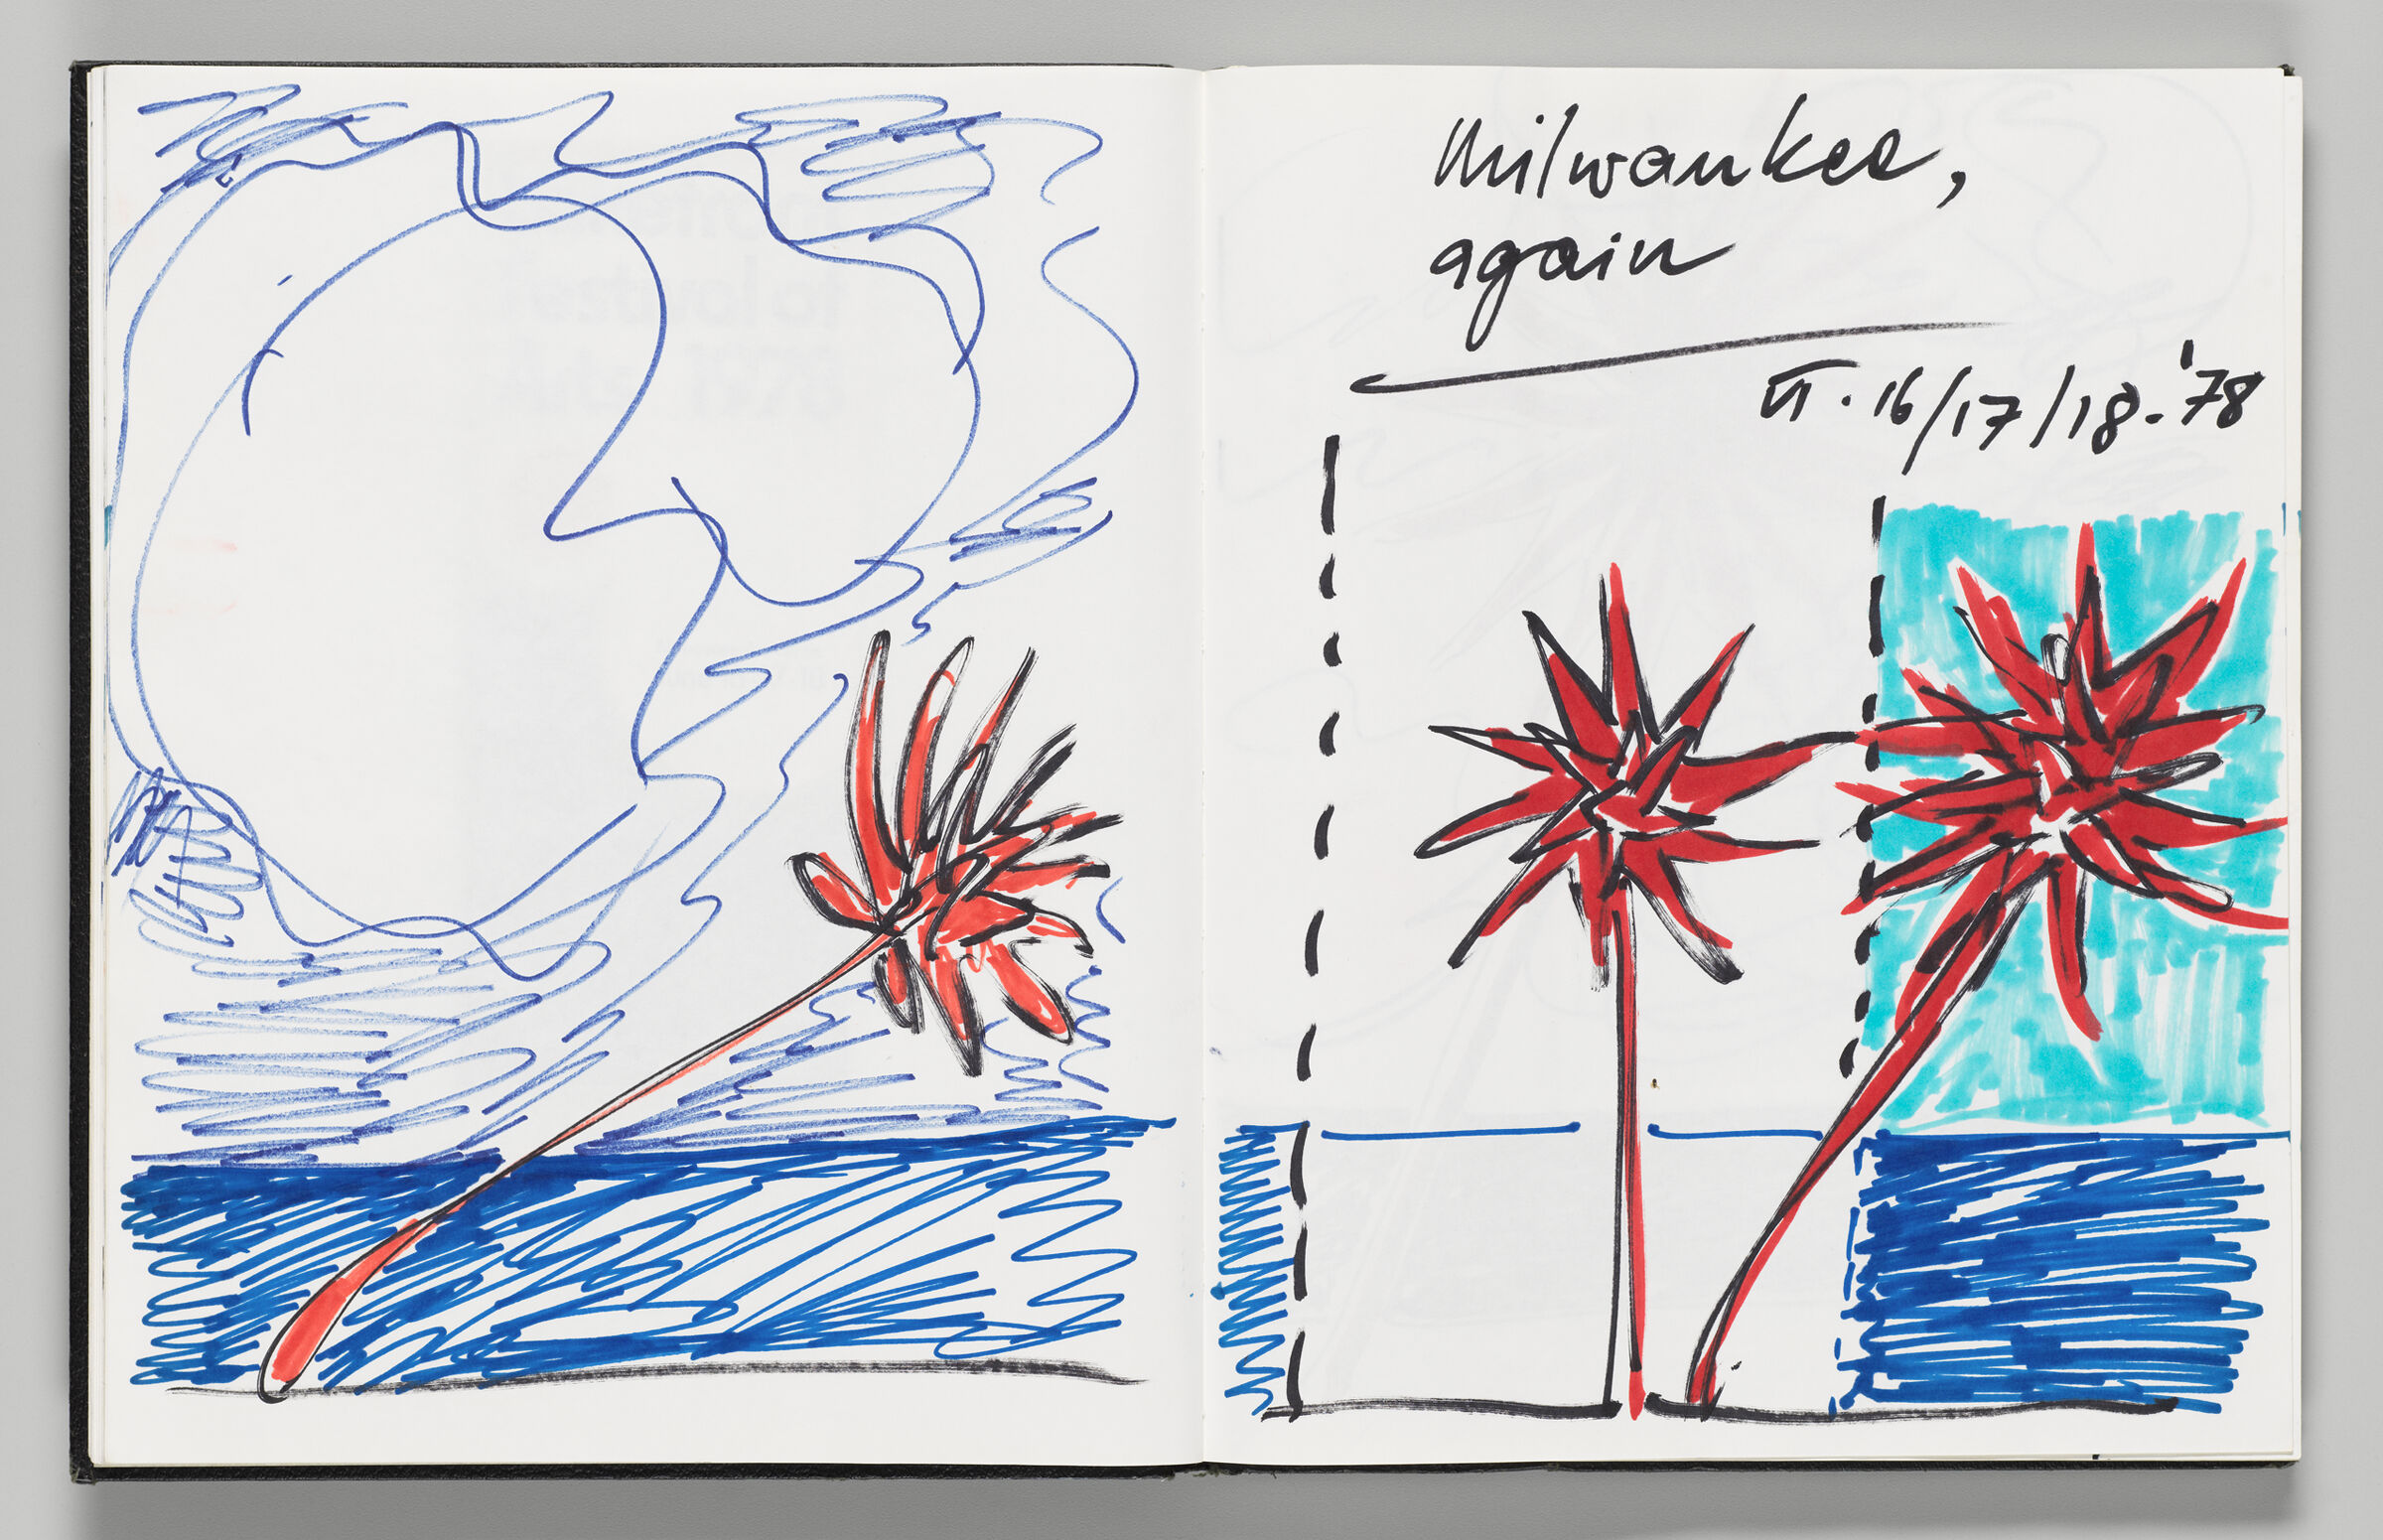 Untitled (Sketch Of Lakefront Anemone, Left Page); Untitled (Sketches Of Lakefront Anemone, Right Page)